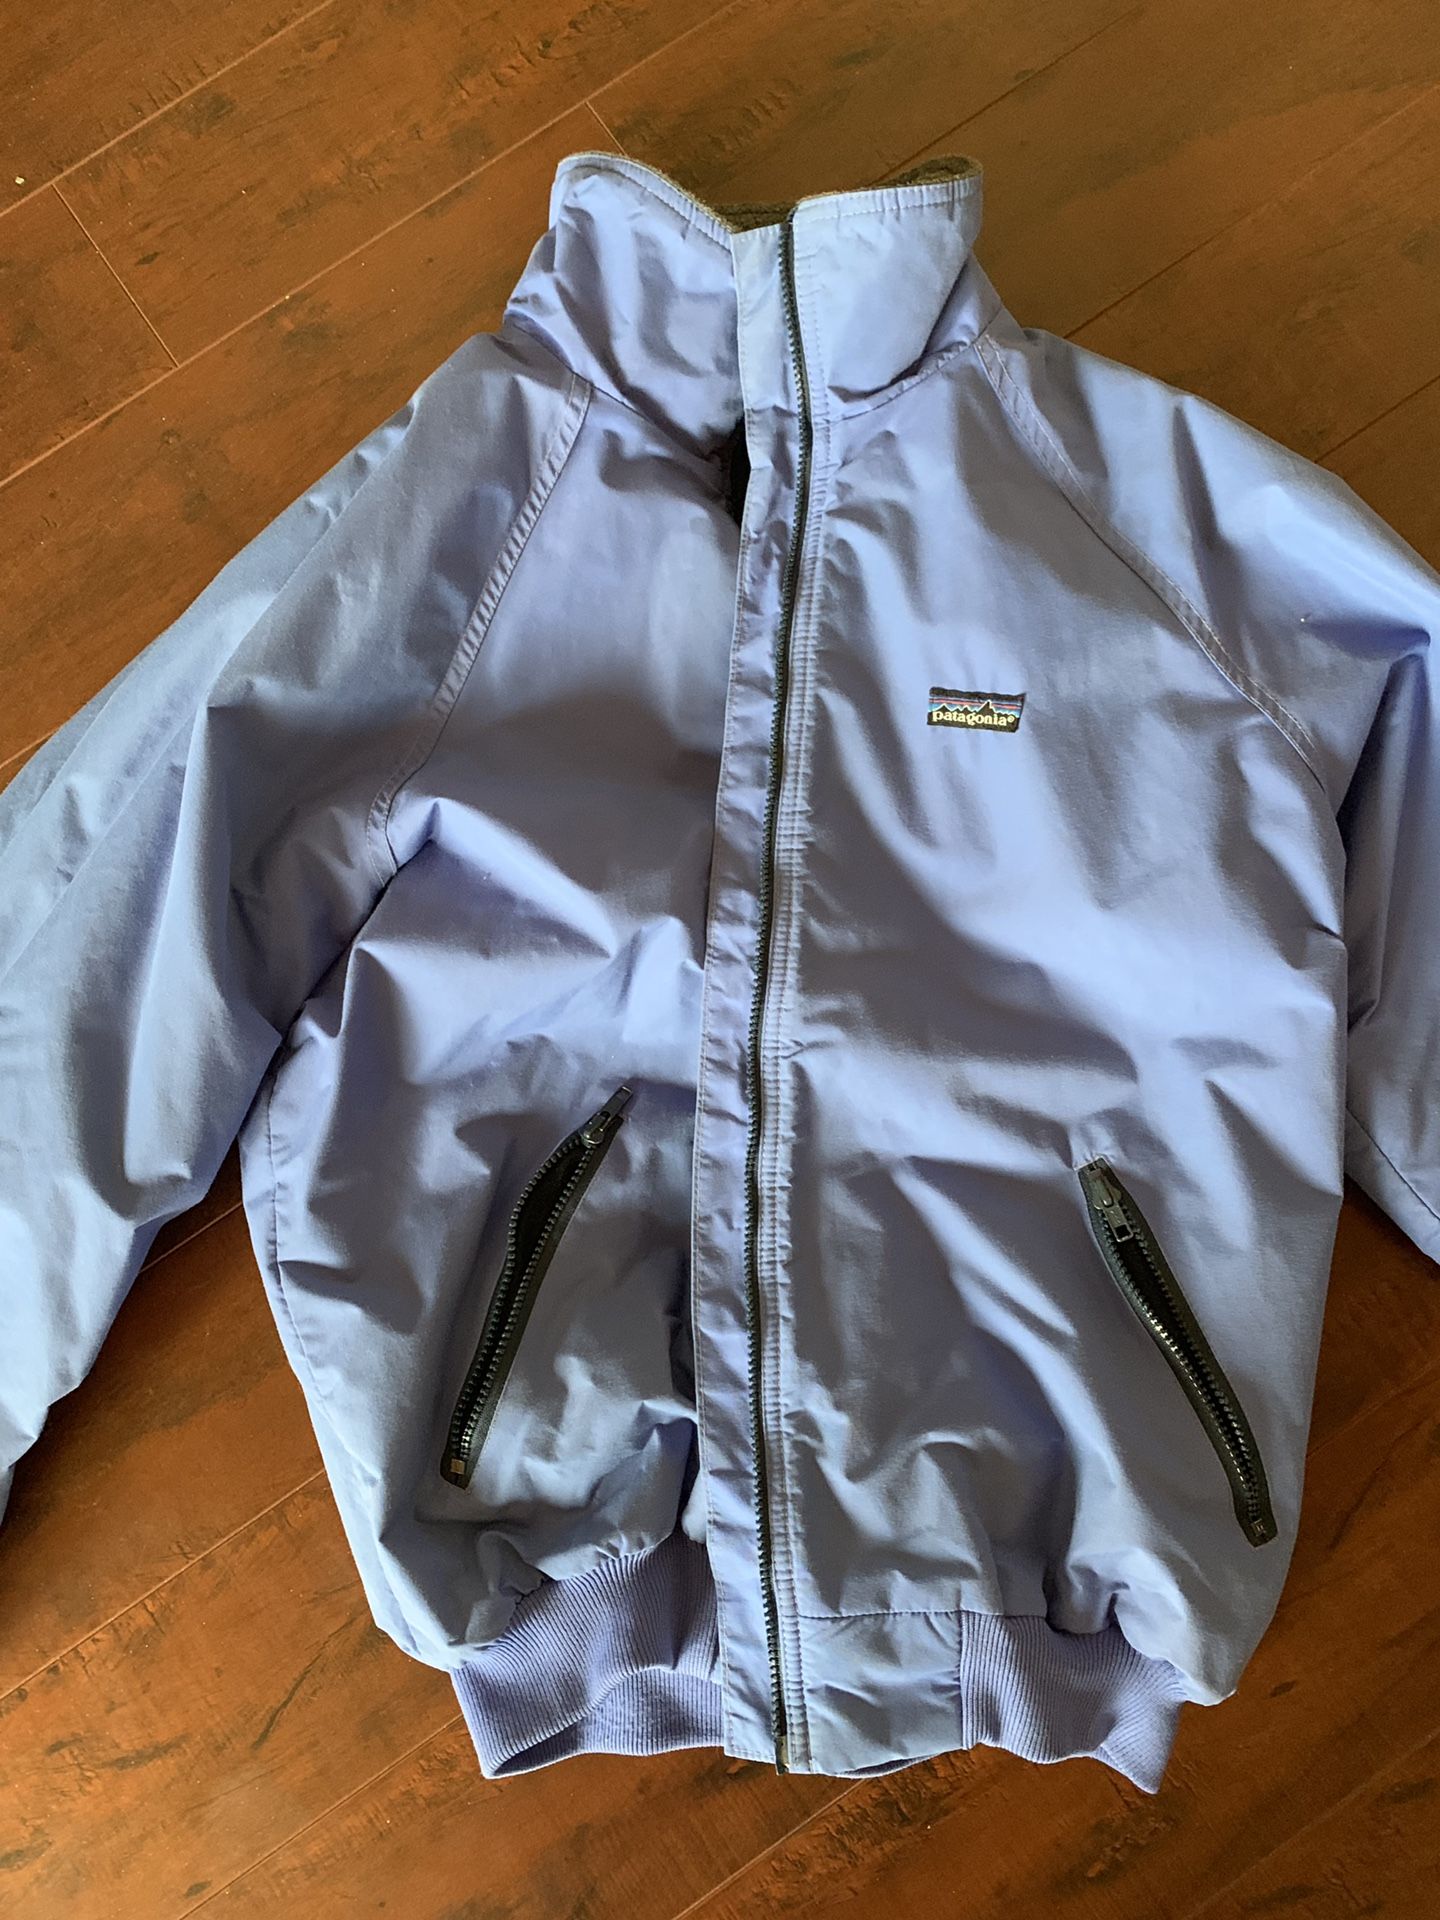 Vintage Men’s XL Patagonia Jacket - fits like a loose L and a fitted XL